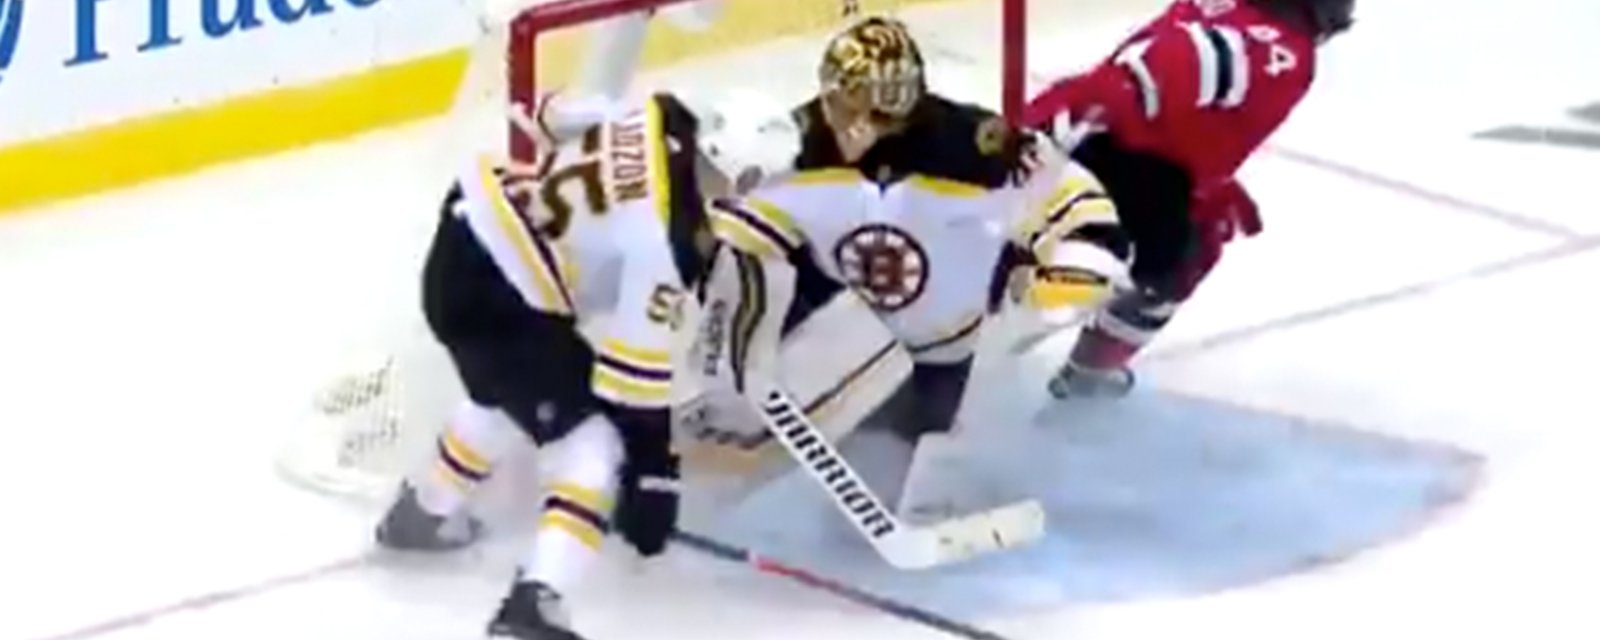 Miles Wood nearly takes off Tuukka Rask's head with dangerous stick swinging incident